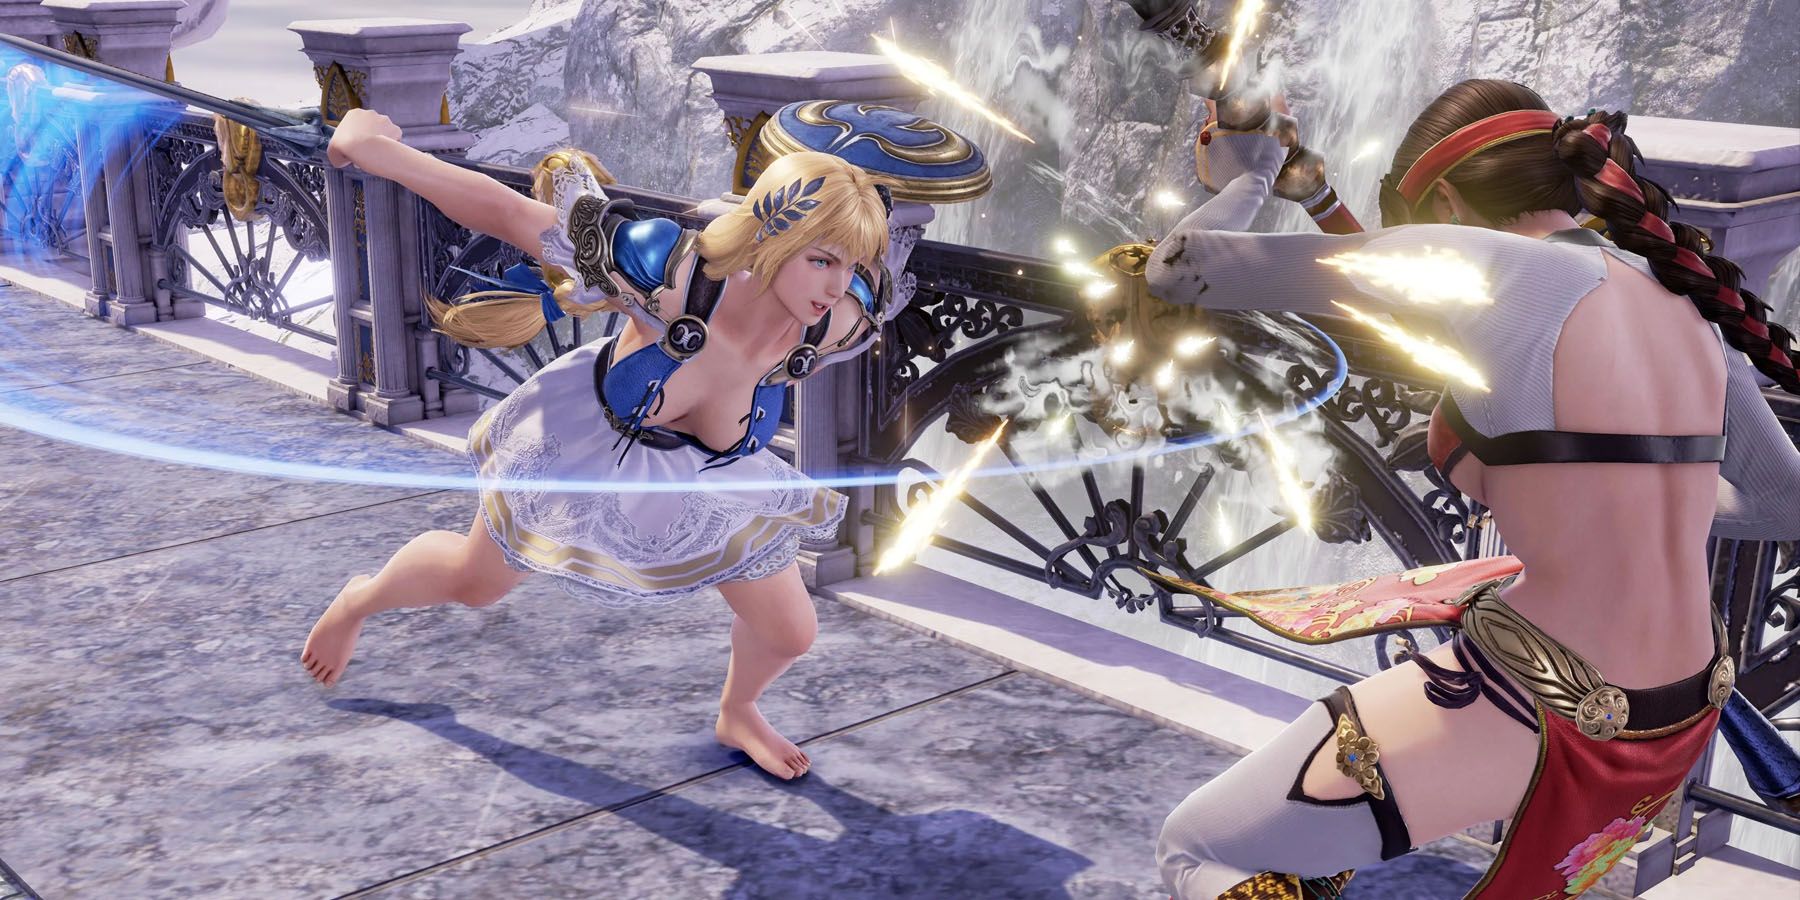 Attacking foes in Soulcalibur 6